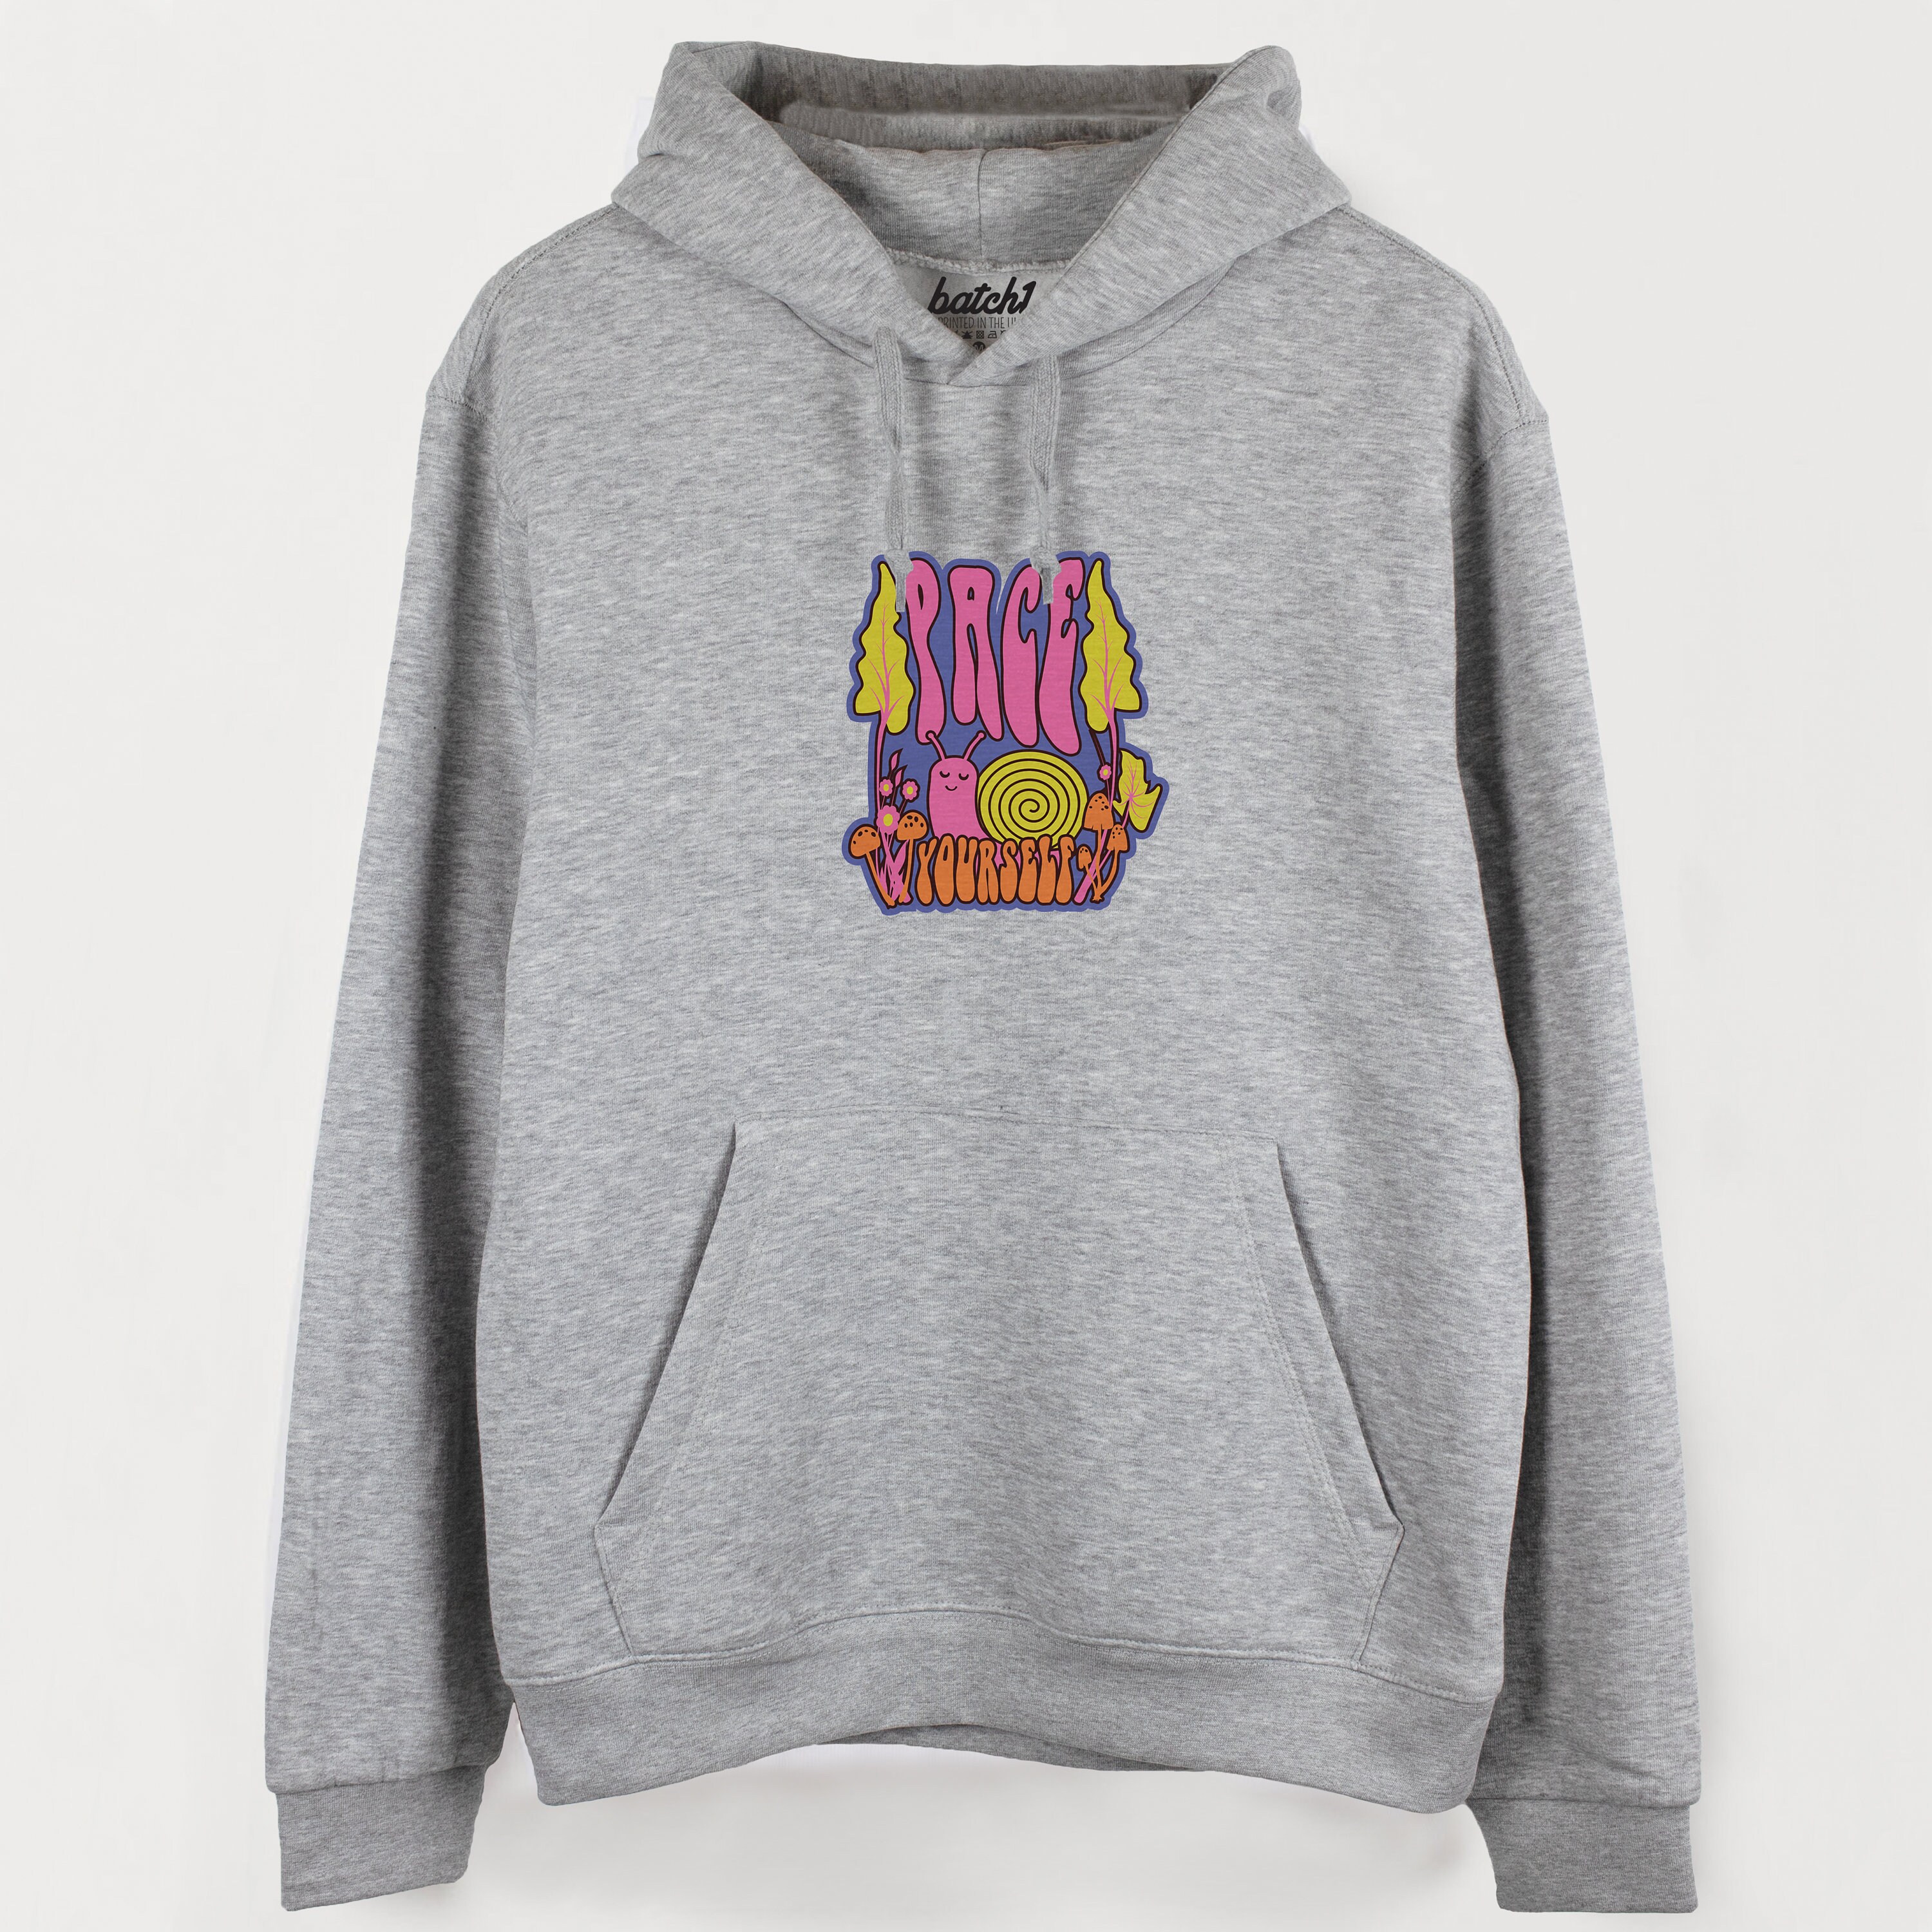 Pace Yourself Women's Slogan Hoodie - Etsy